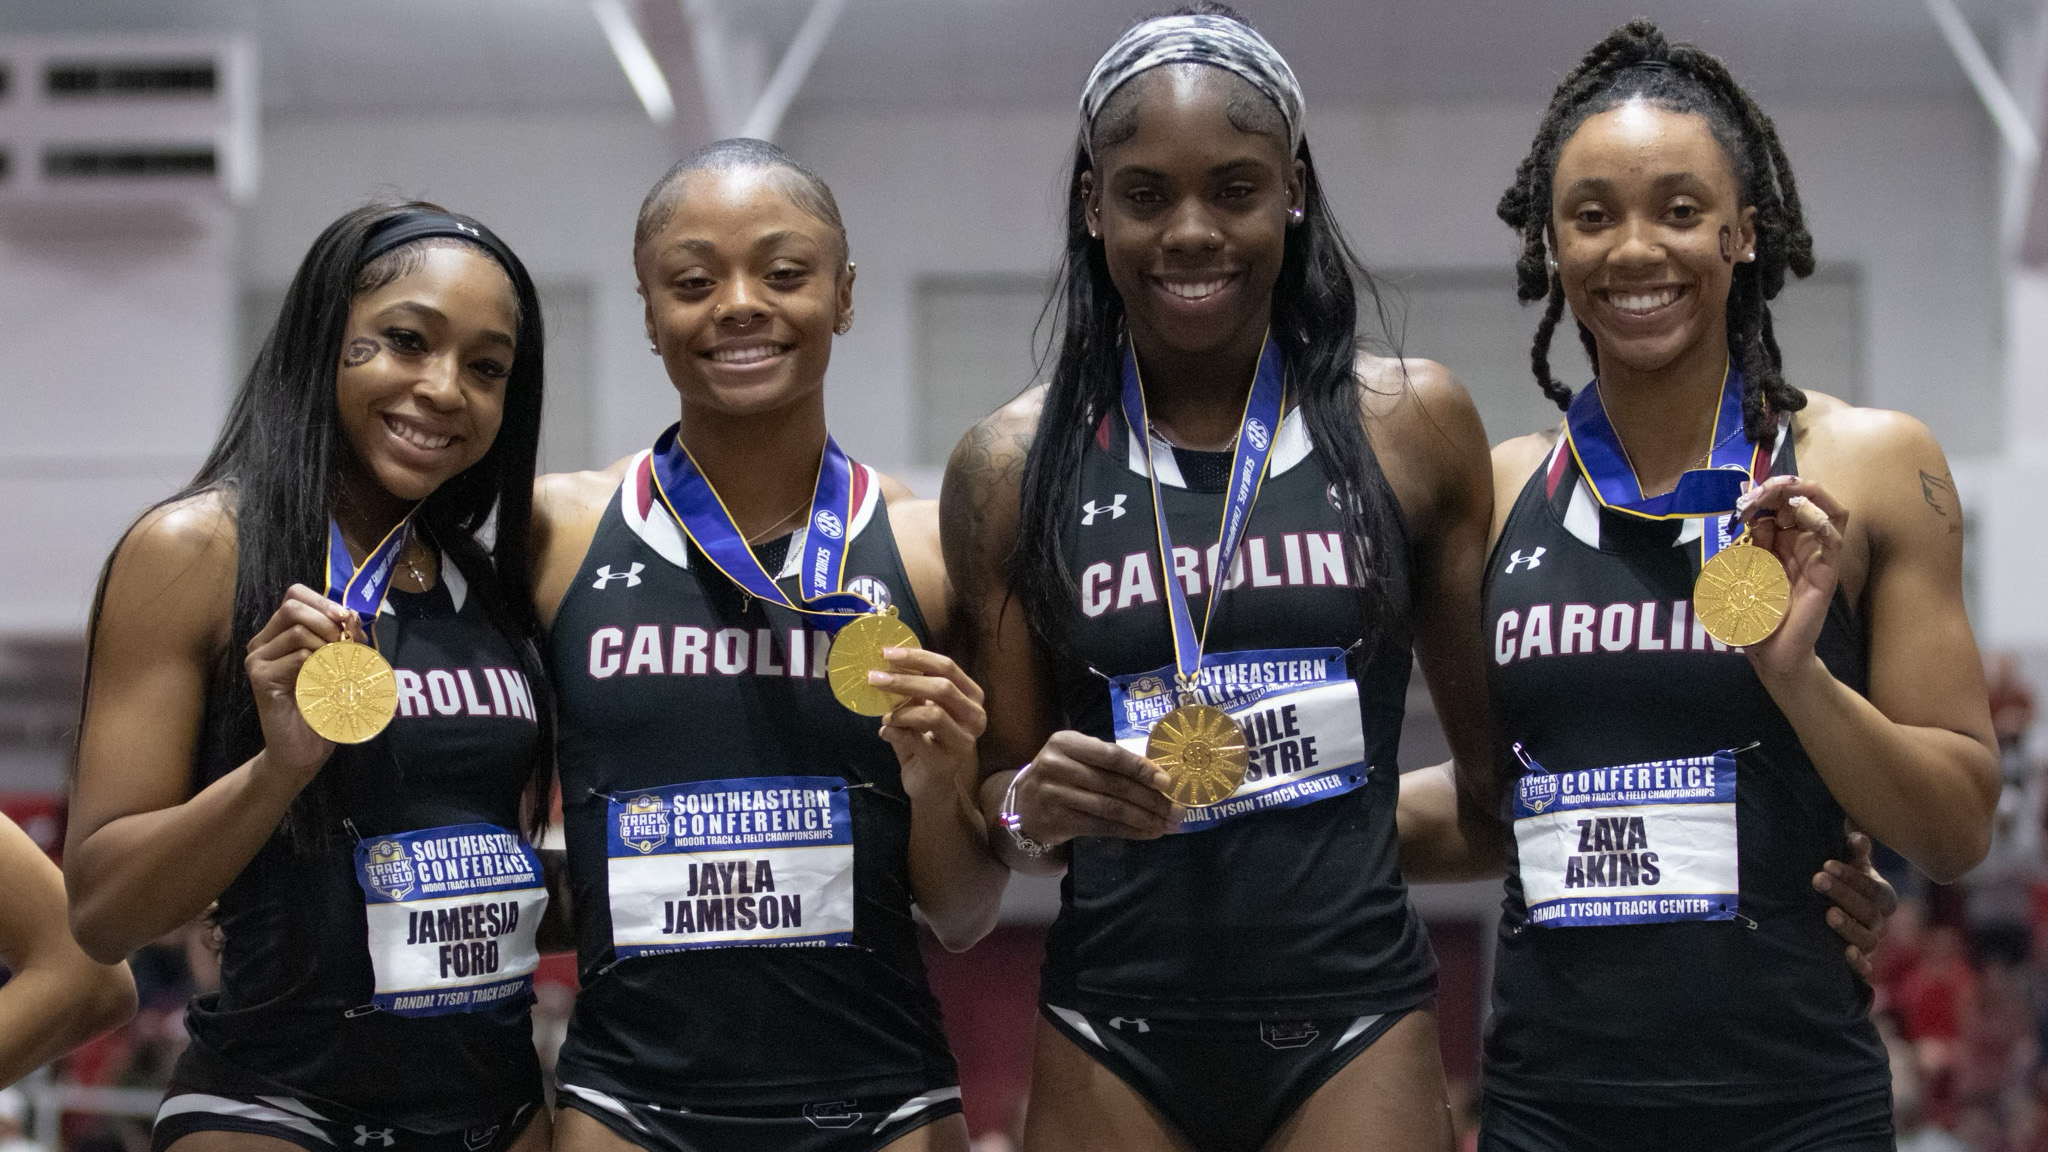 Gamecocks Secure Six Medals in Final Day of SEC Indoor Championship